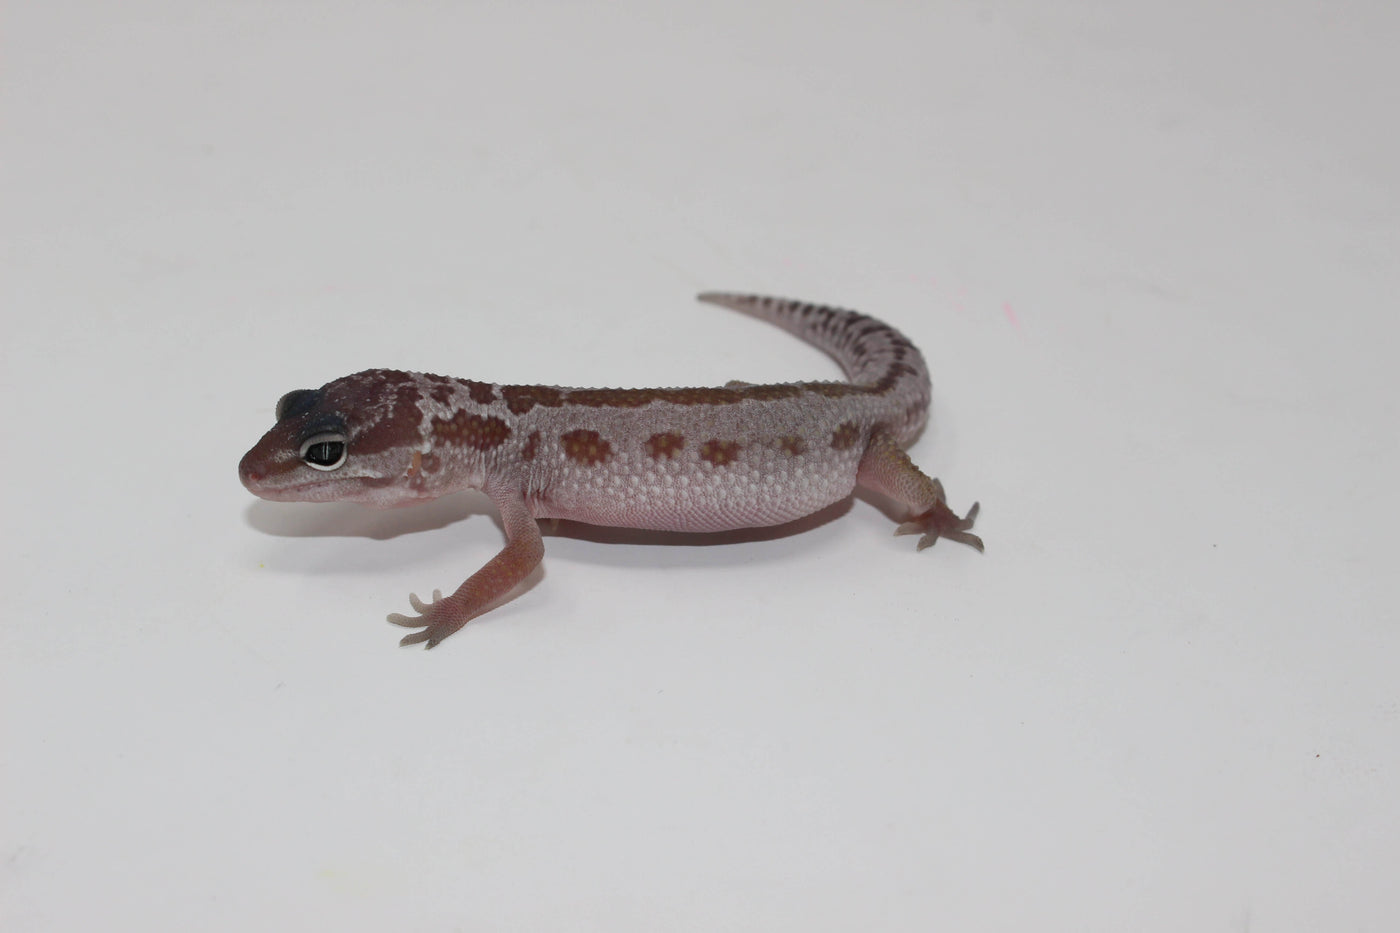 mack snow patternless leopard gecko for sale, buy reptiles online